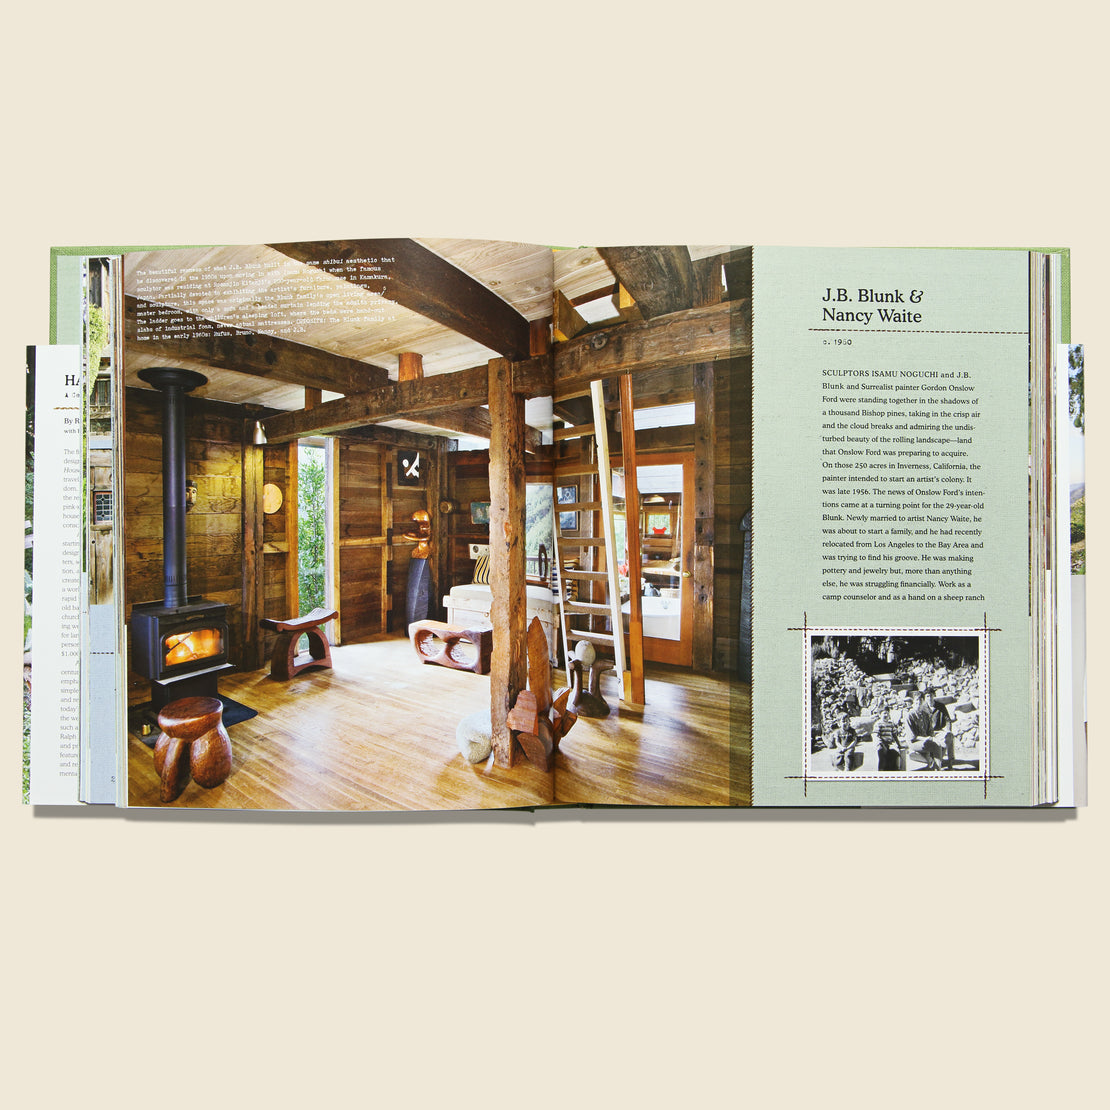 Handmade Houses: A Century of Earth-Friendly Home Design - Richard Olsen - Bookstore - STAG Provisions - Gift - Books